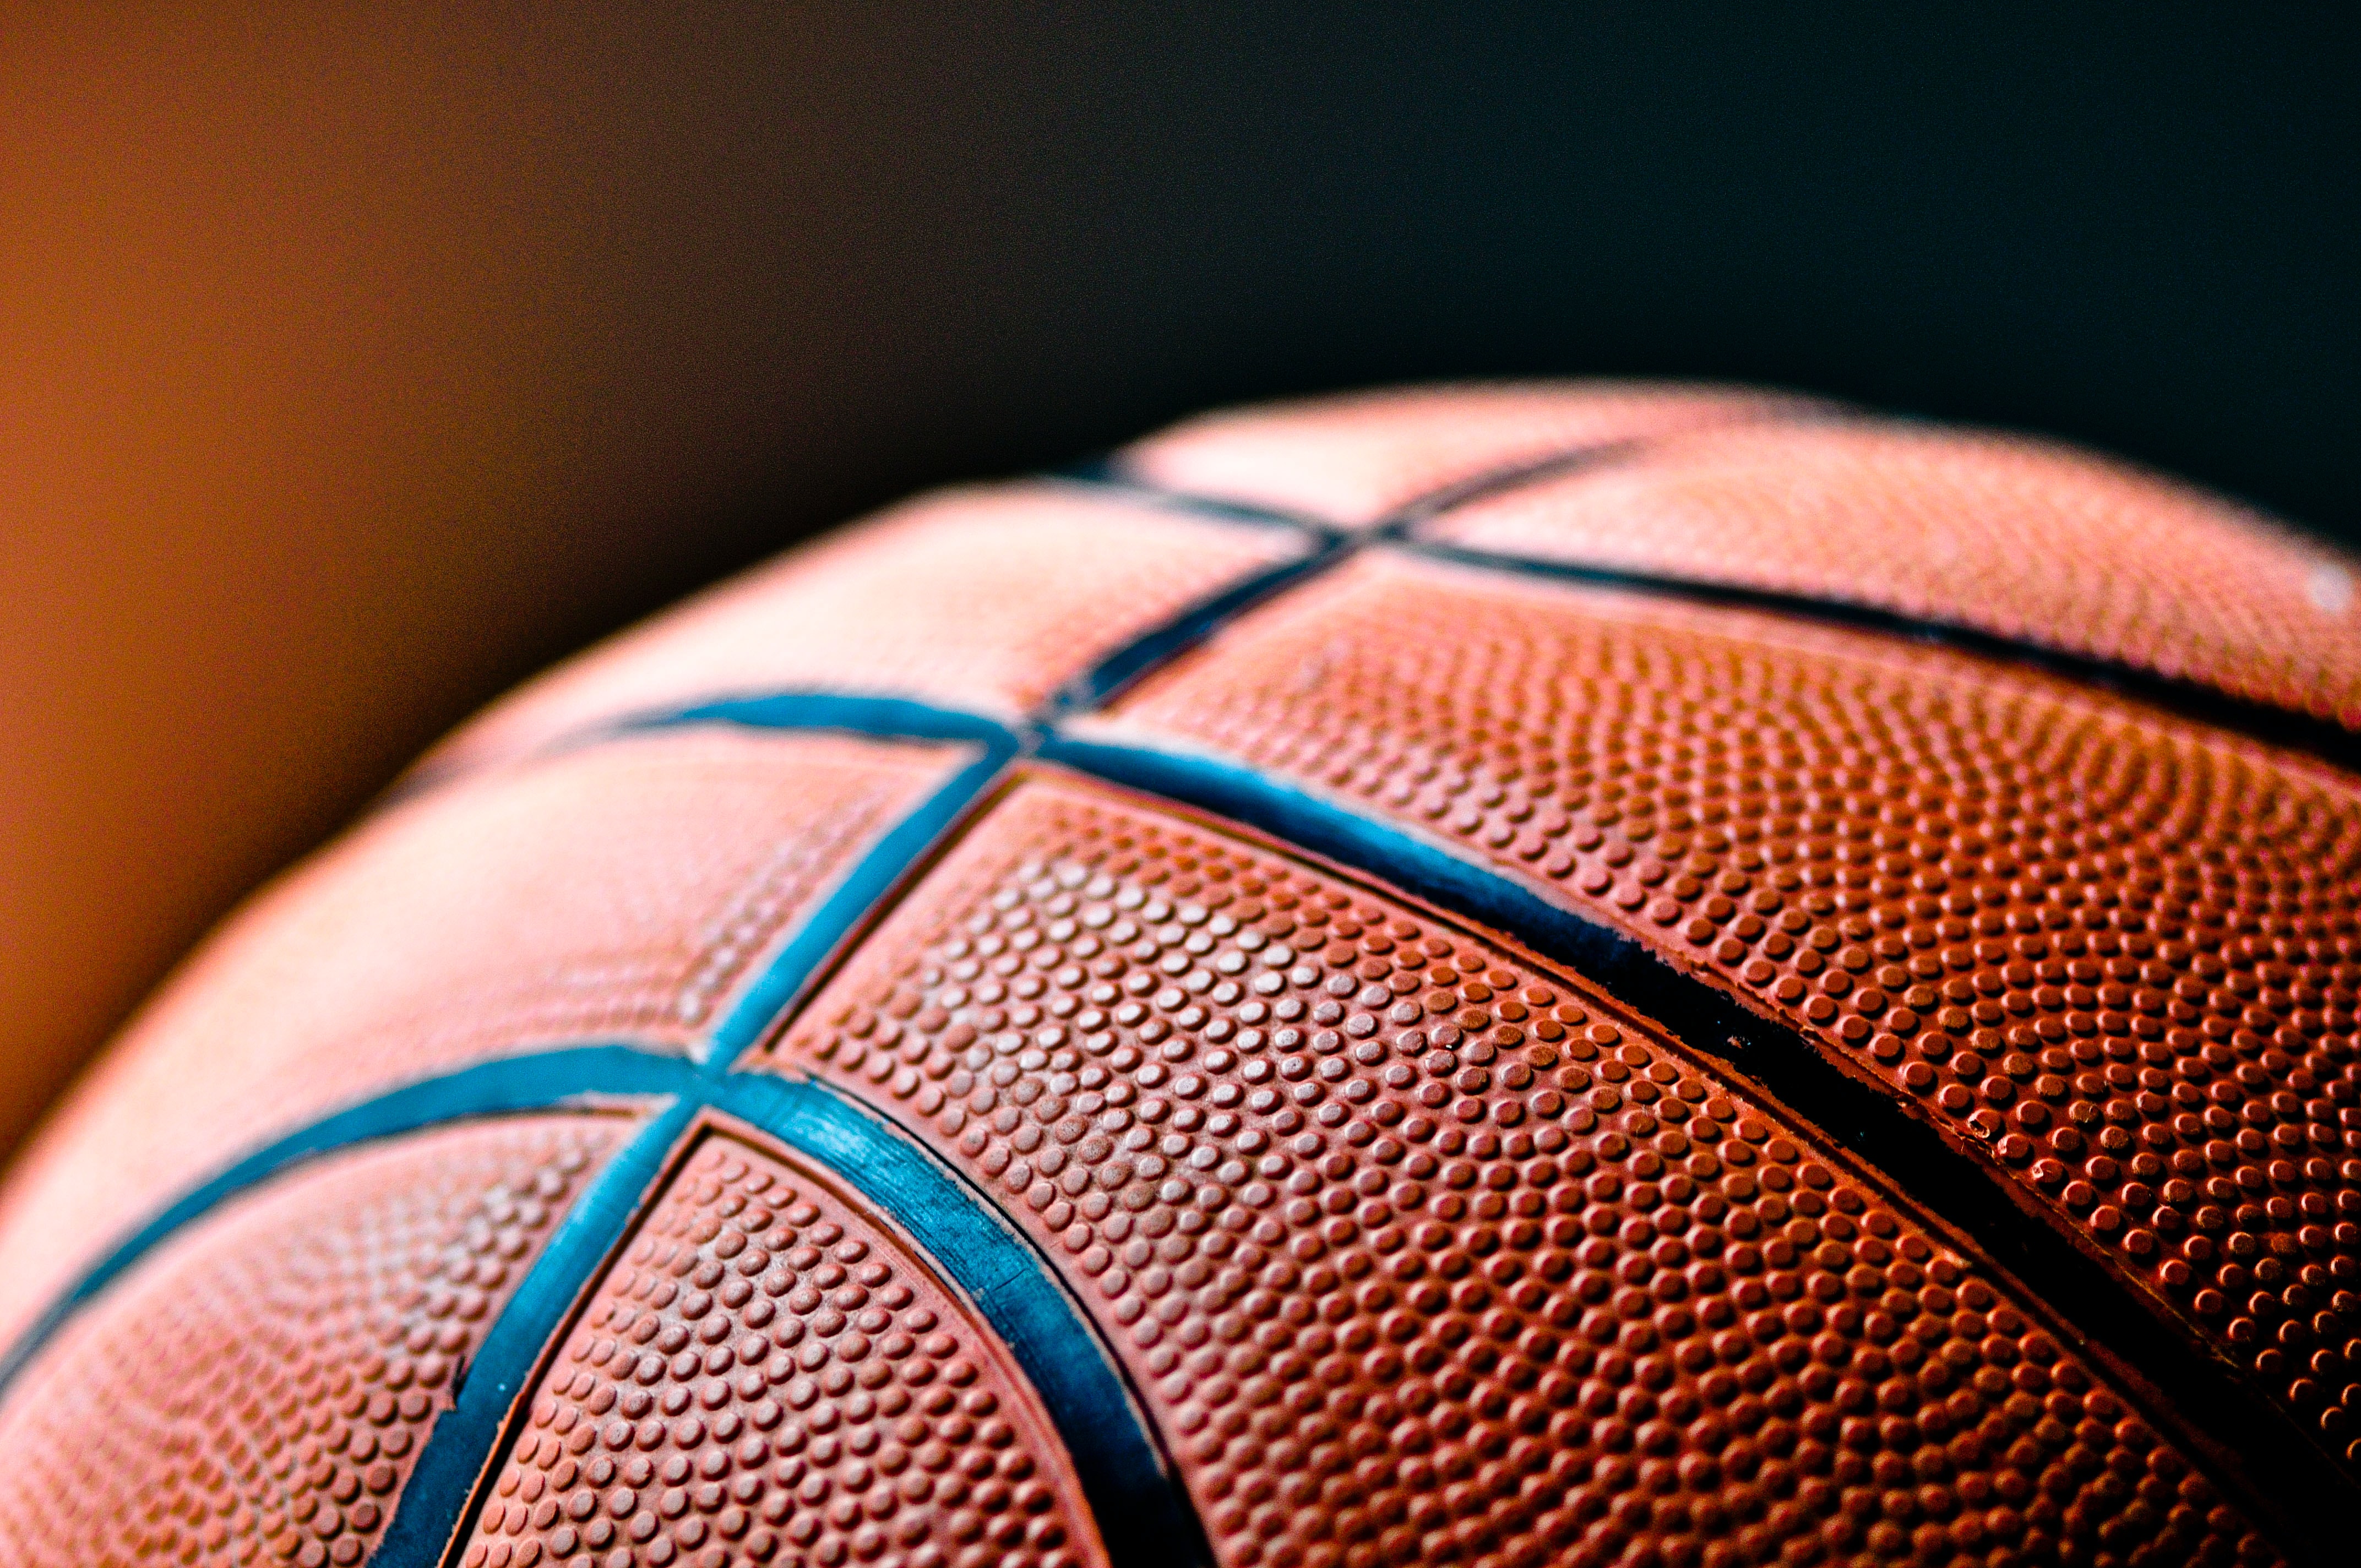 Three quarters of a basketball against a orange to brown gradient background.